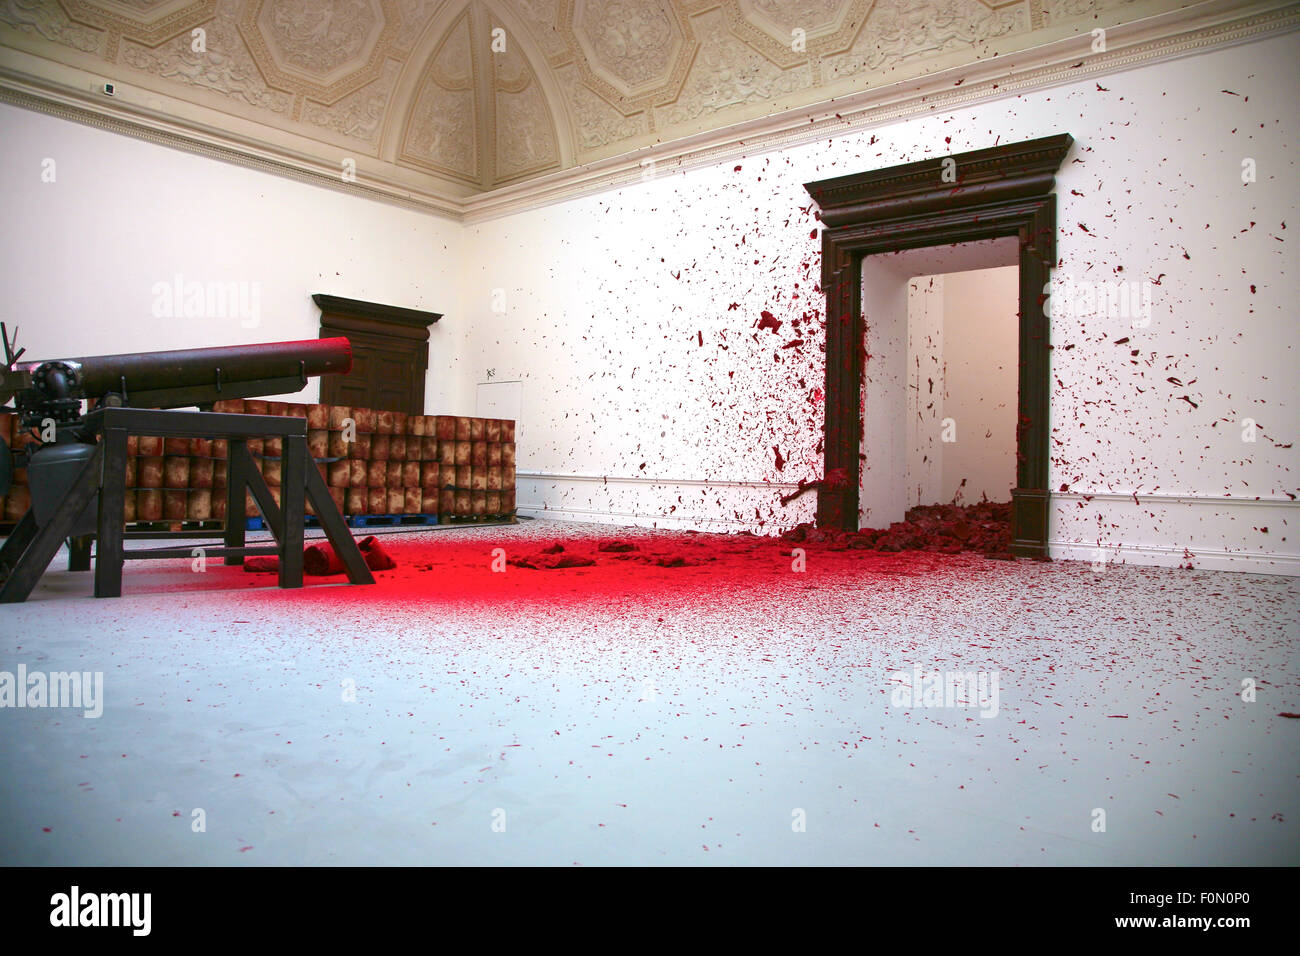 Anish Kapoor exhibition called 'Shooting into the Corner' at the Royal Academy of Art. London Stock Photo